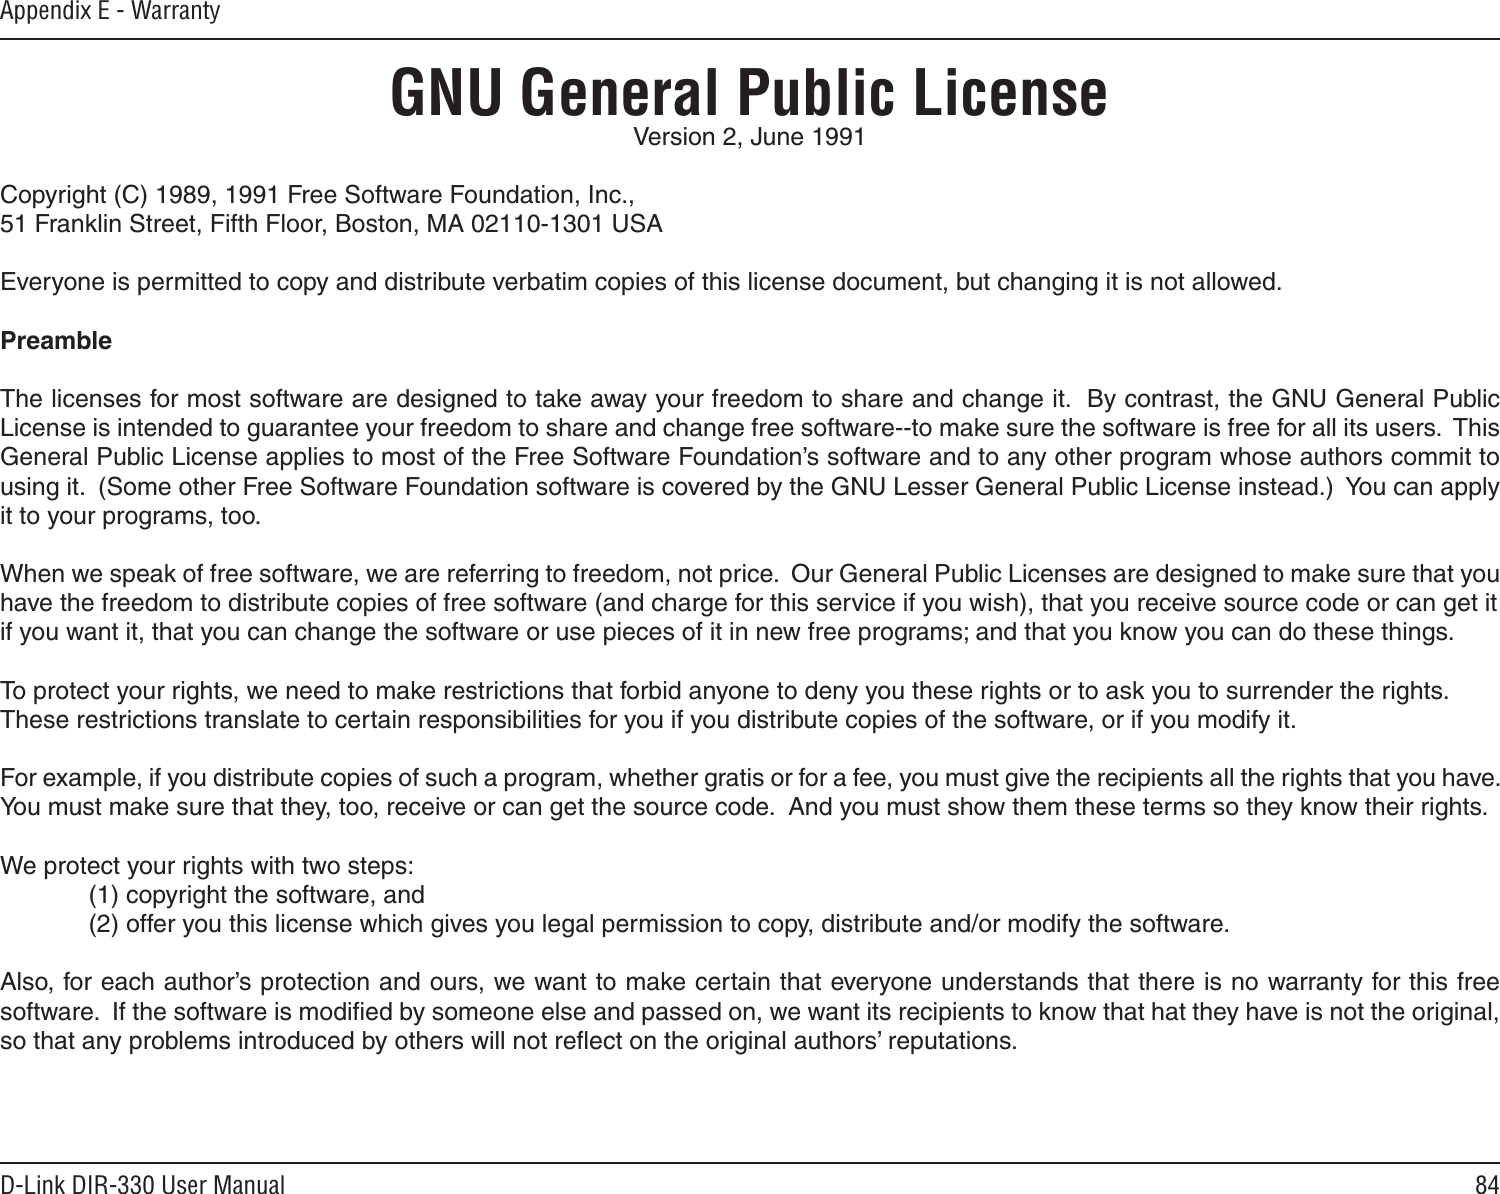 84D-Link DIR-330 User ManualAppendix E - WarrantyGNU General Public LicenseVersion 2, June 1991Copyright (C) 1989, 1991 Free Software Foundation, Inc.,51 Franklin Street, Fifth Floor, Boston, MA 02110-1301 USAEveryone is permitted to copy and distribute verbatim copies of this license document, but changing it is not allowed.PreambleThe licenses for most software are designed to take away your freedom to share and change it.  By contrast, the GNU General Public License is intended to guarantee your freedom to share and change free software--to make sure the software is free for all its users.  This General Public License applies to most of the Free Software Foundation’s software and to any other program whose authors commit to using it.  (Some other Free Software Foundation software is covered by the GNU Lesser General Public License instead.)  You can apply it to your programs, too.When we speak of free software, we are referring to freedom, not price.  Our General Public Licenses are designed to make sure that you have the freedom to distribute copies of free software (and charge for this service if you wish), that you receive source code or can get itif you want it, that you can change the software or use pieces of it in new free programs; and that you know you can do these things.To protect your rights, we need to make restrictions that forbid anyone to deny you these rights or to ask you to surrender the rights.These restrictions translate to certain responsibilities for you if you distribute copies of the software, or if you modify it.For example, if you distribute copies of such a program, whether gratis or for a fee, you must give the recipients all the rights that you have.  You must make sure that they, too, receive or can get the source code.  And you must show them these terms so they know their rights.We protect your rights with two steps: (1) copyright the software, and(2) offer you this license which gives you legal permission to copy, distribute and/or modify the software.Also, for each author’s protection and ours, we want to make certain that everyone understands that there is no warranty for this free software.  If the software is modiﬁed by someone else and passed on, we want its recipients to know that hat they have is not the original, so that any problems introduced by others will not reﬂect on the original authors’ reputations.